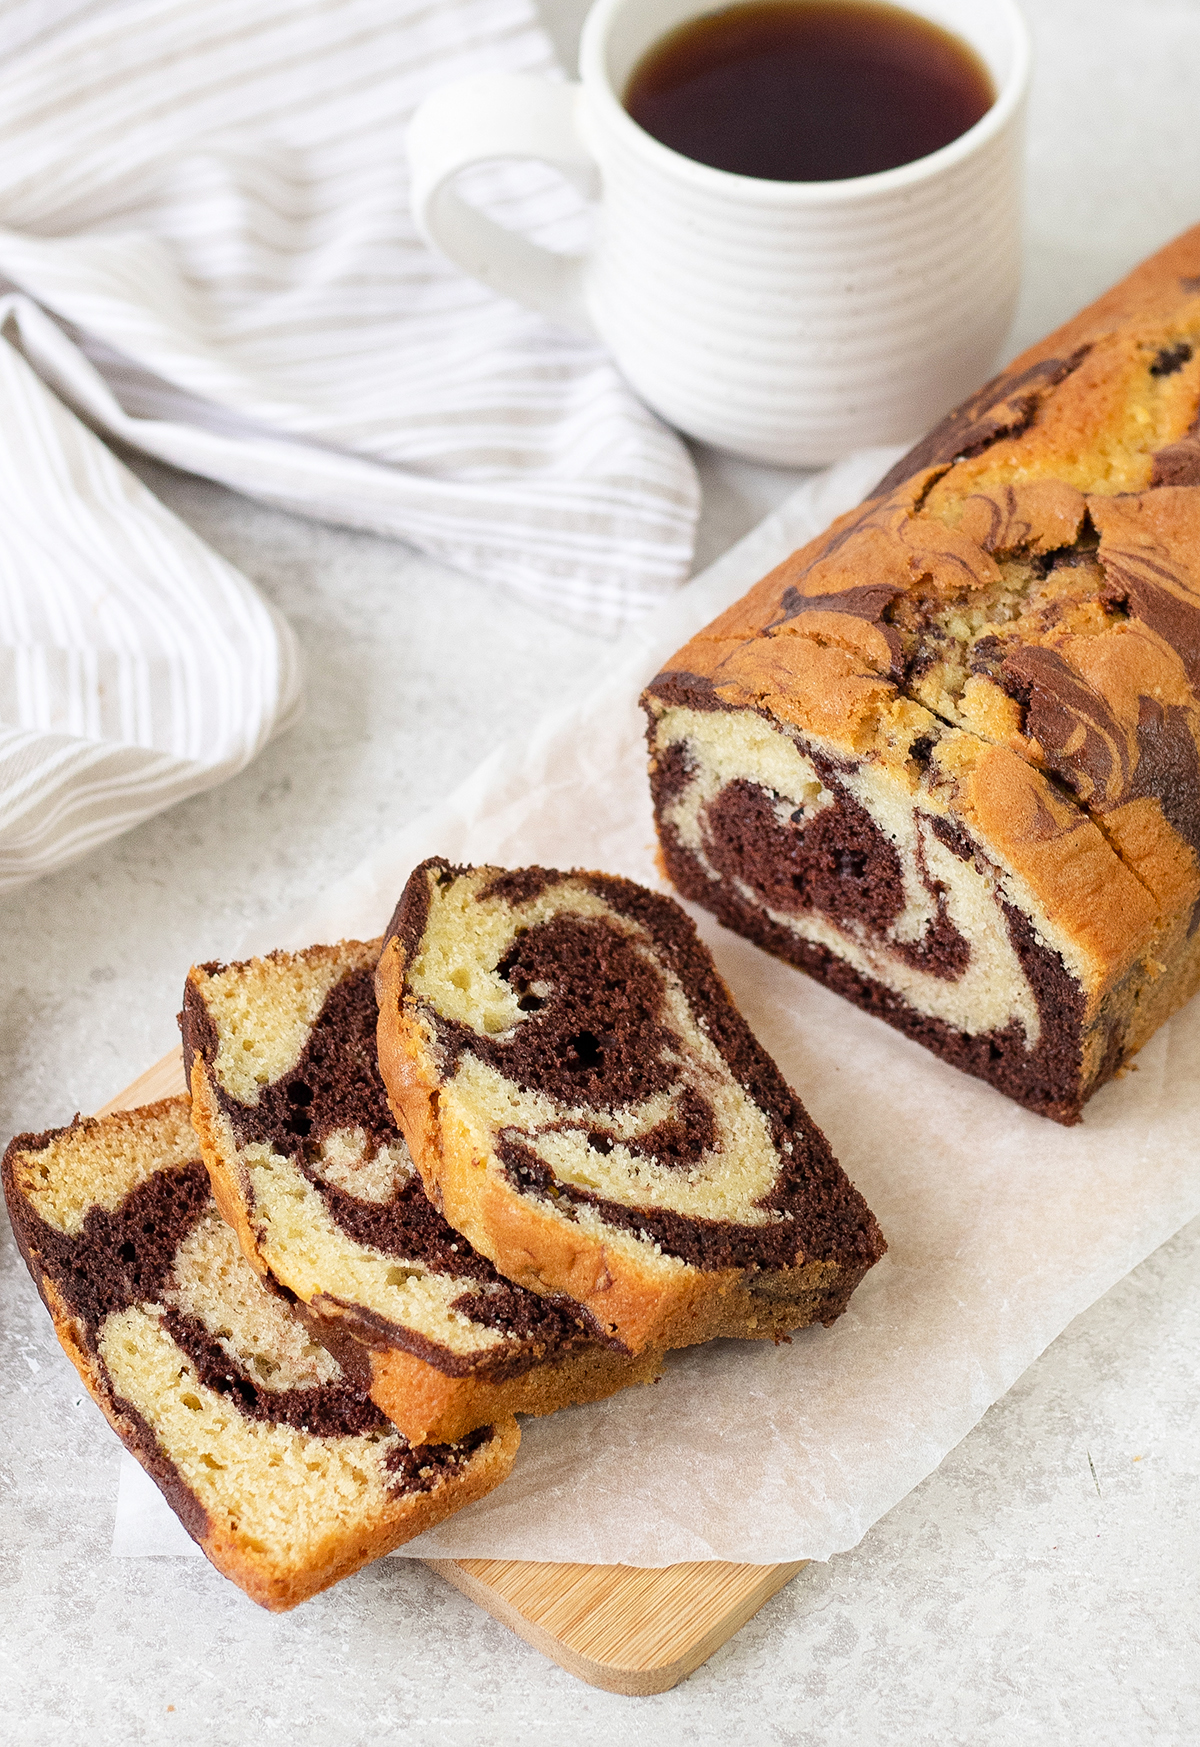 Chocolate Marble Loaf and a cup of tea.